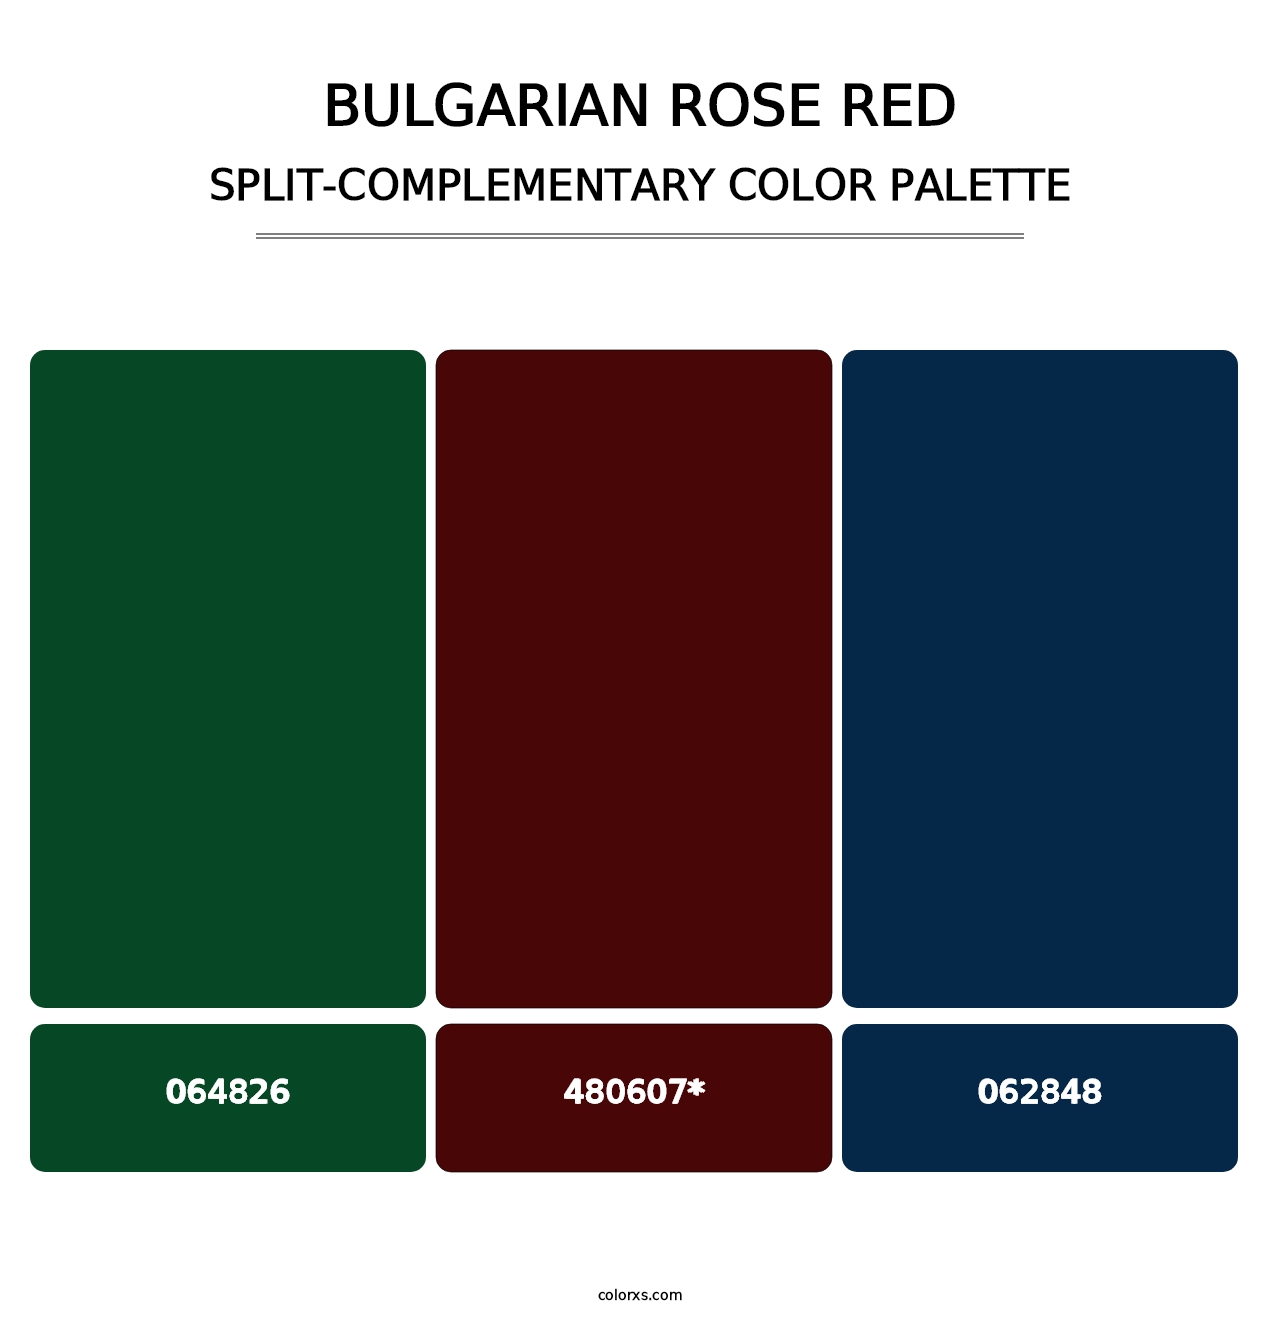 Bulgarian Rose Red - Split-Complementary Color Palette